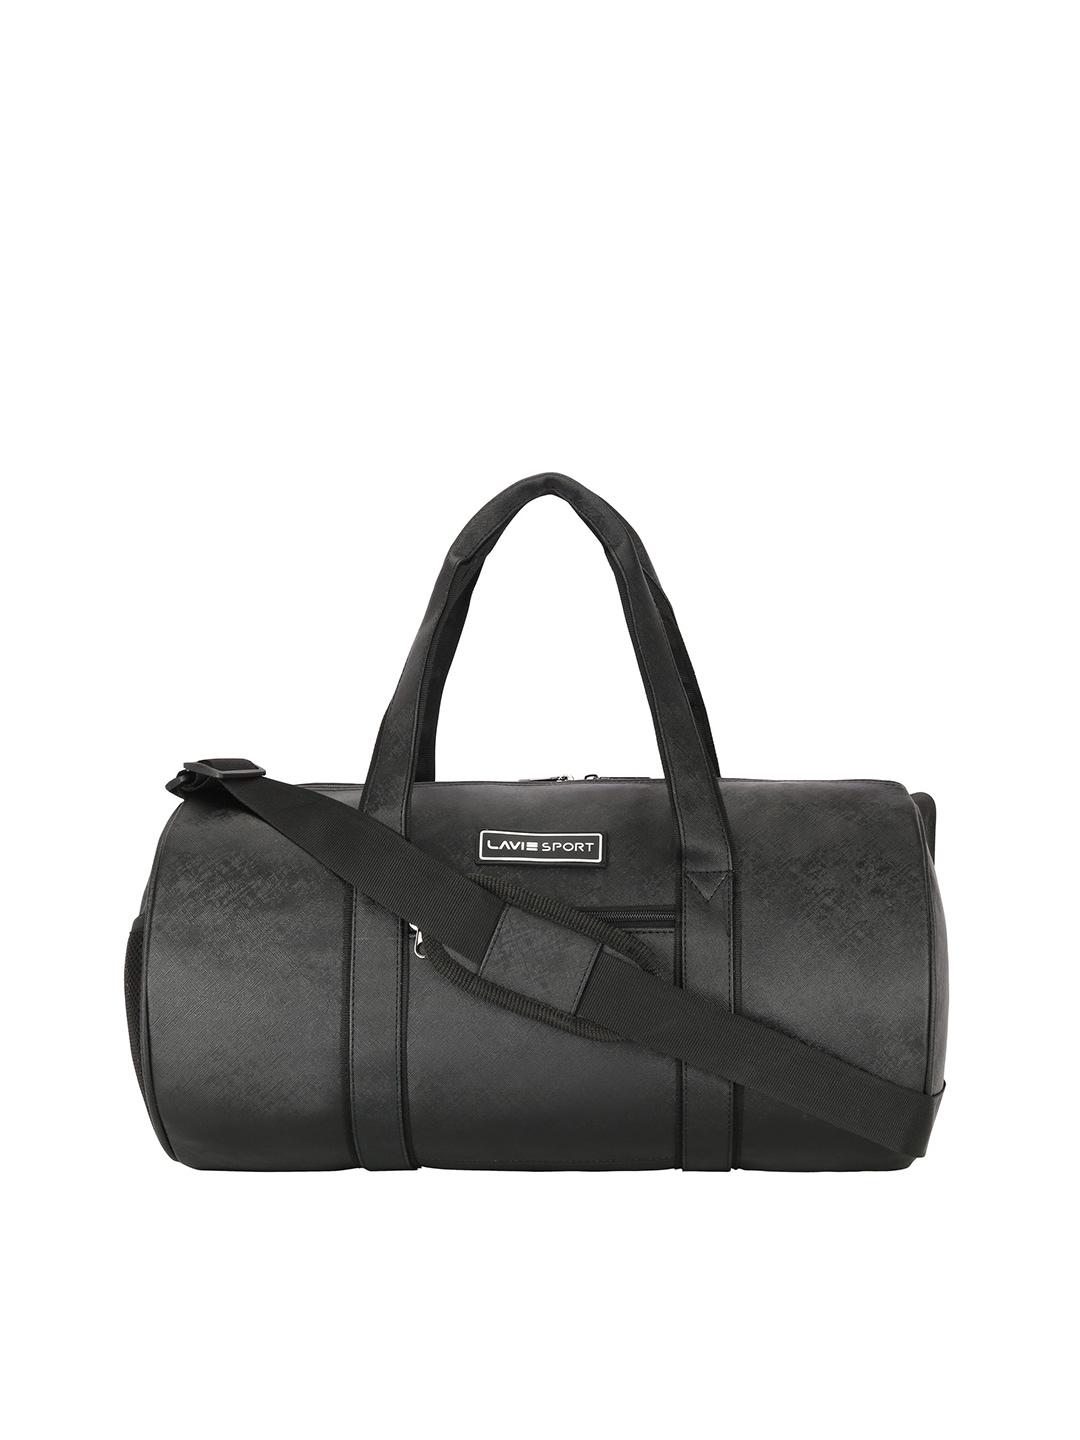 lavie-sport-olympic-27l-synthetic-leather-gym-duffel-bag